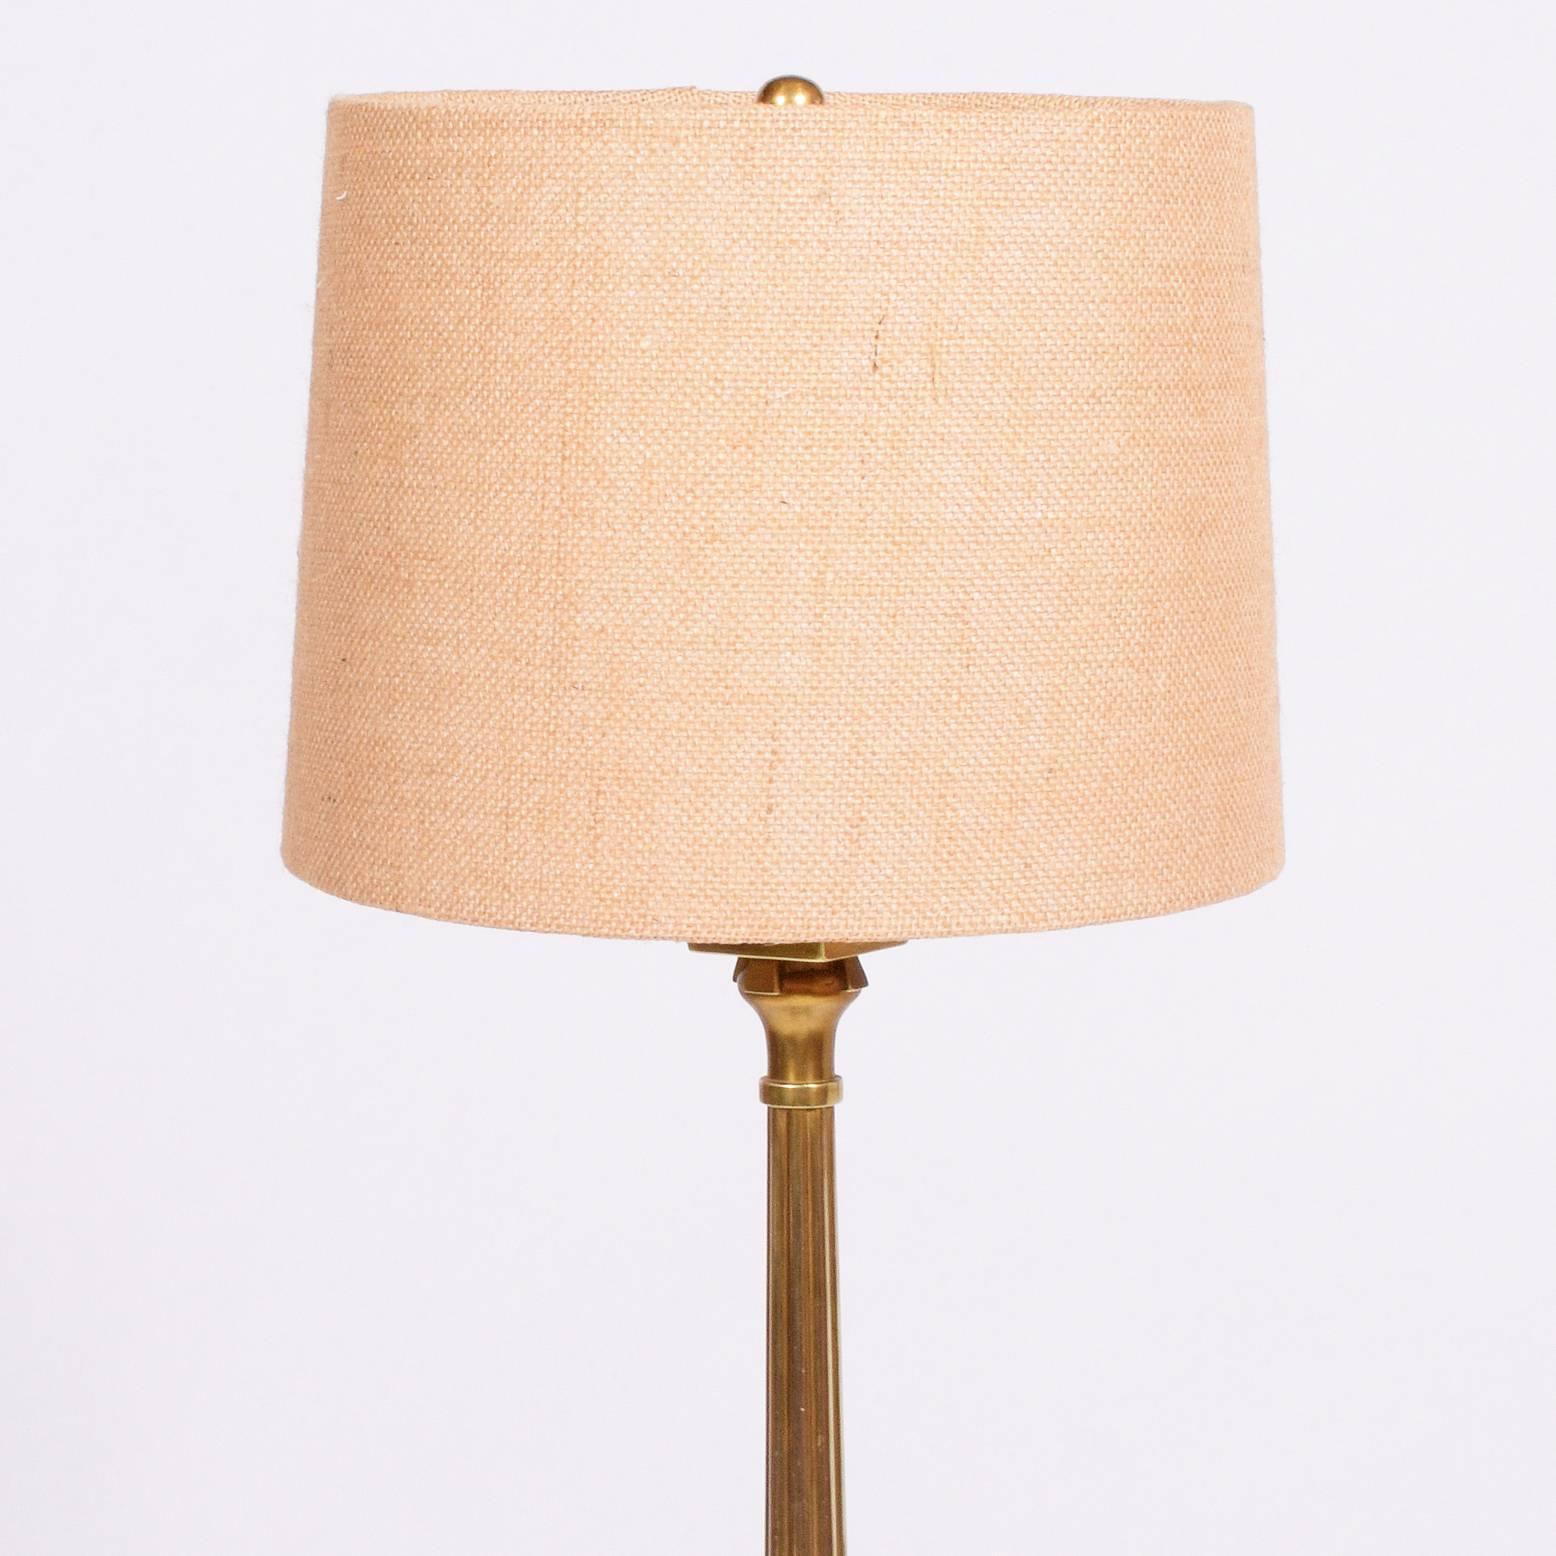 Danish architect Thorvald Bindesbøll is one of the most important form the Art Nouveau to arts and Craft person in Denmark. This piece is a beautifully designed solid brass table lamp from the turn of the century.